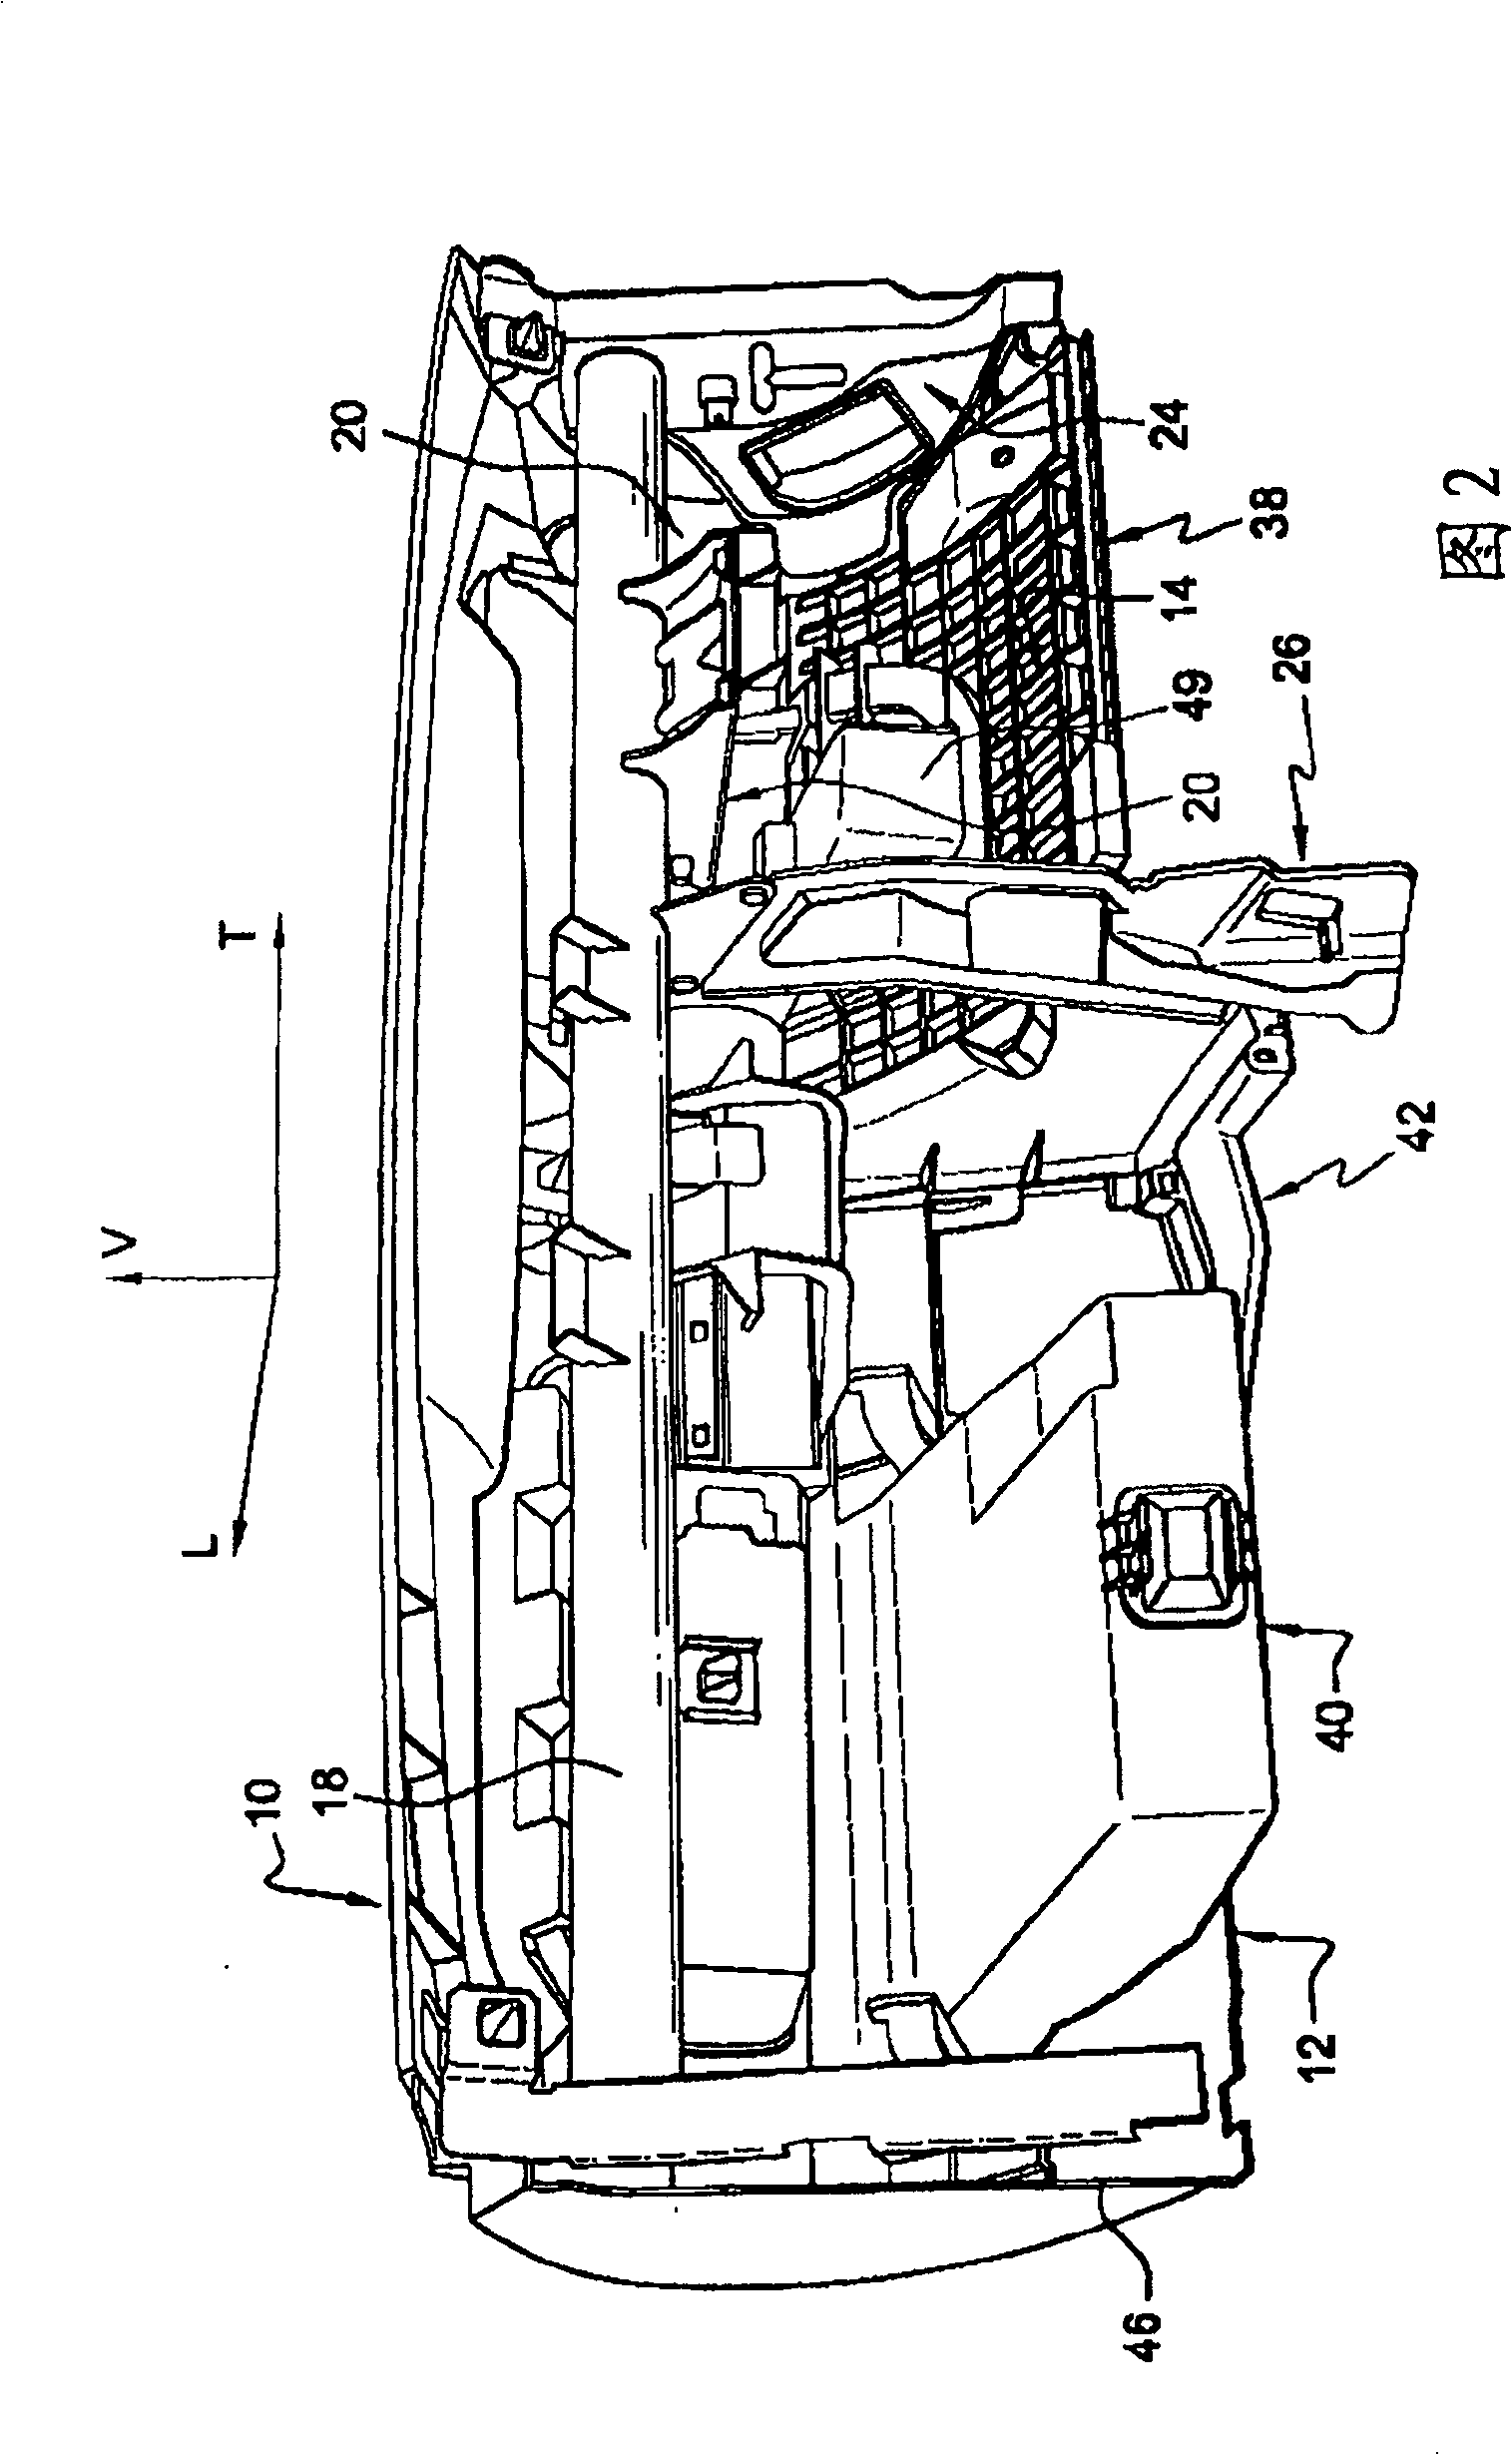 Arrangement for protecting a motor vehicle passenger's knees and instrument panel therefor